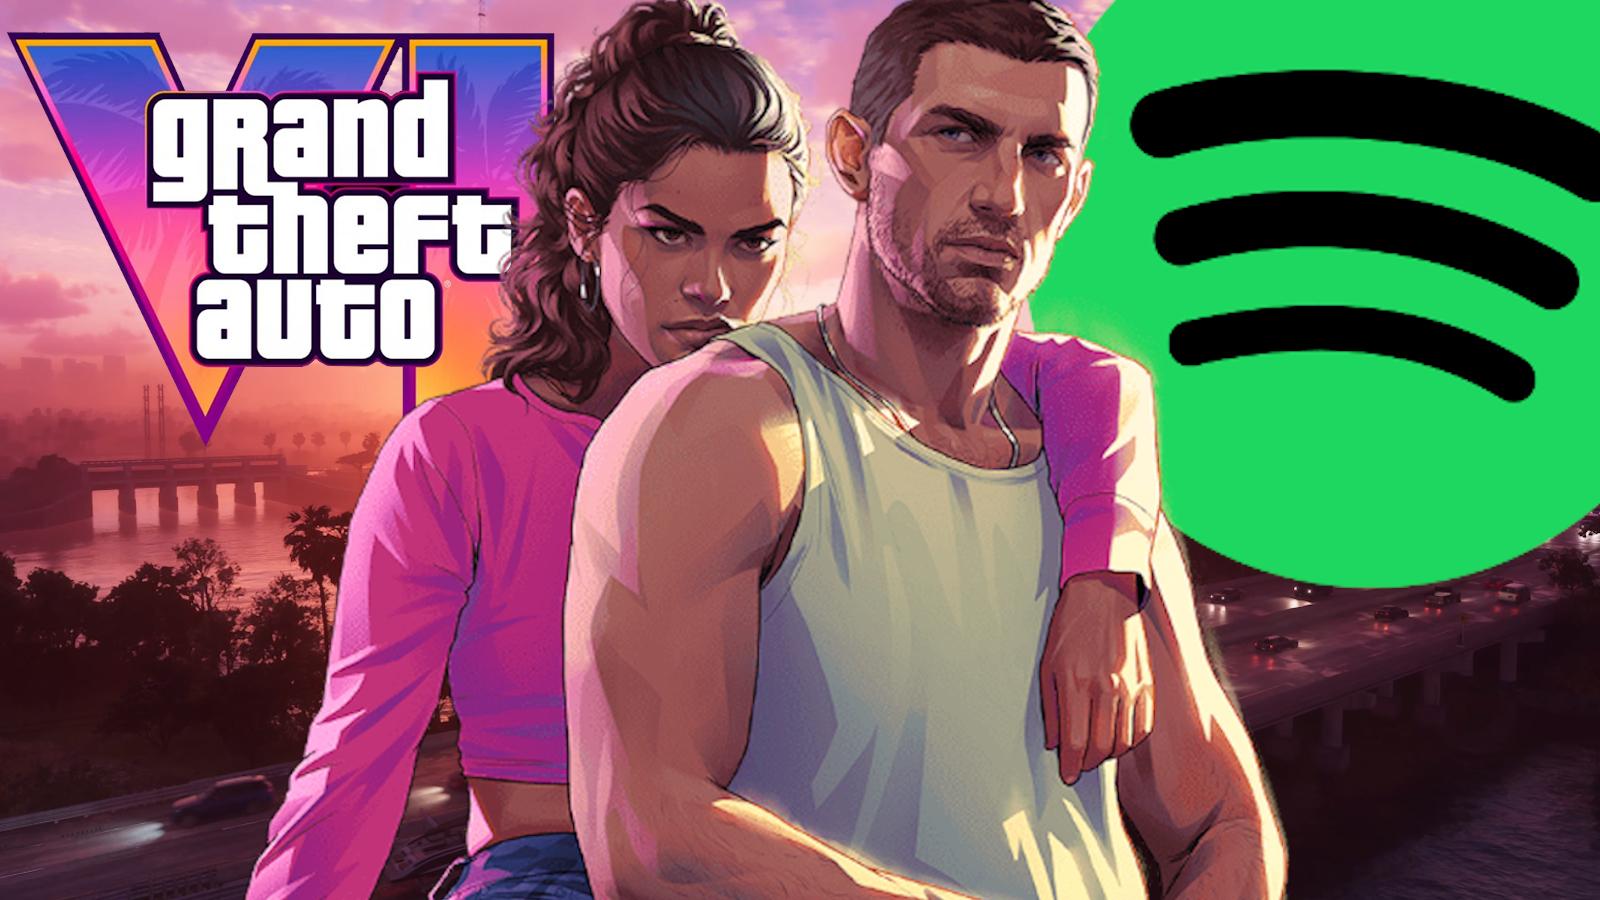 jason and lucia from gta 6 with spotify logo